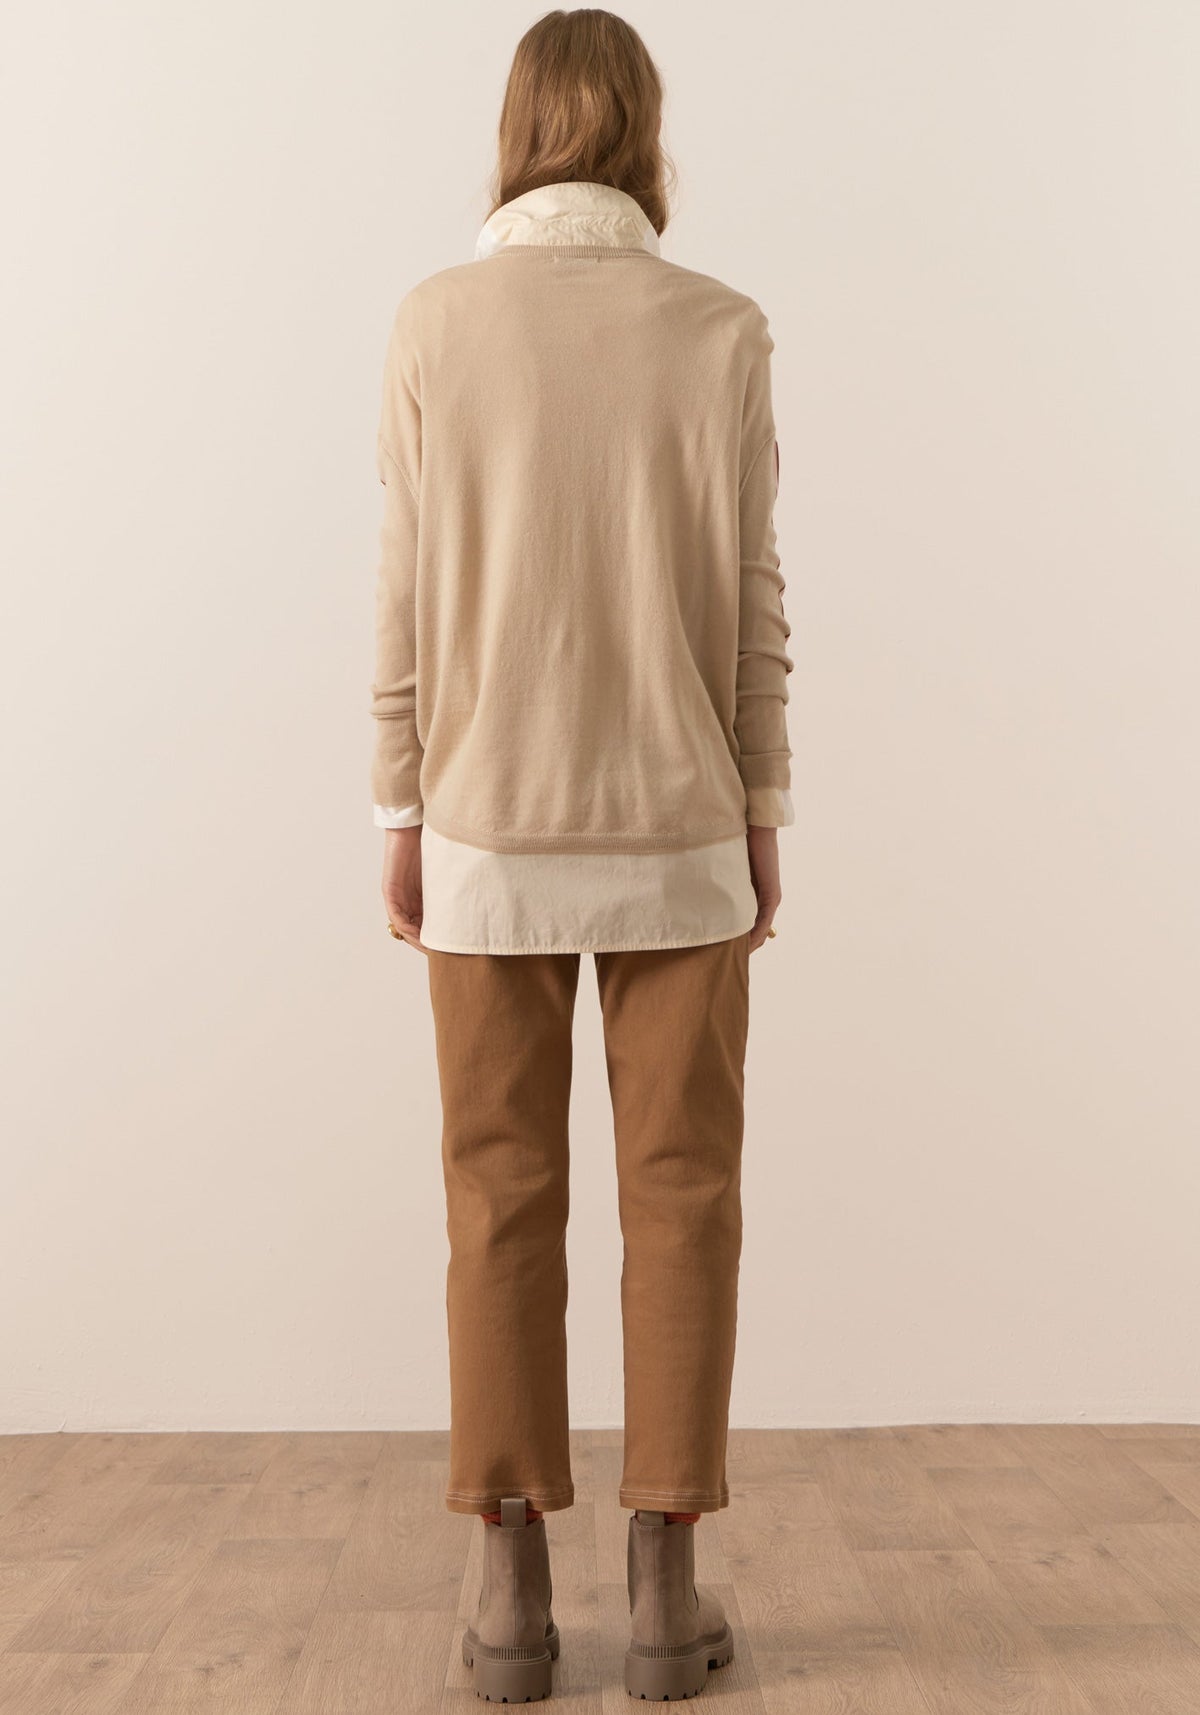 Bennet Contrast Drape Knit - Pebble/Toffee/Pink